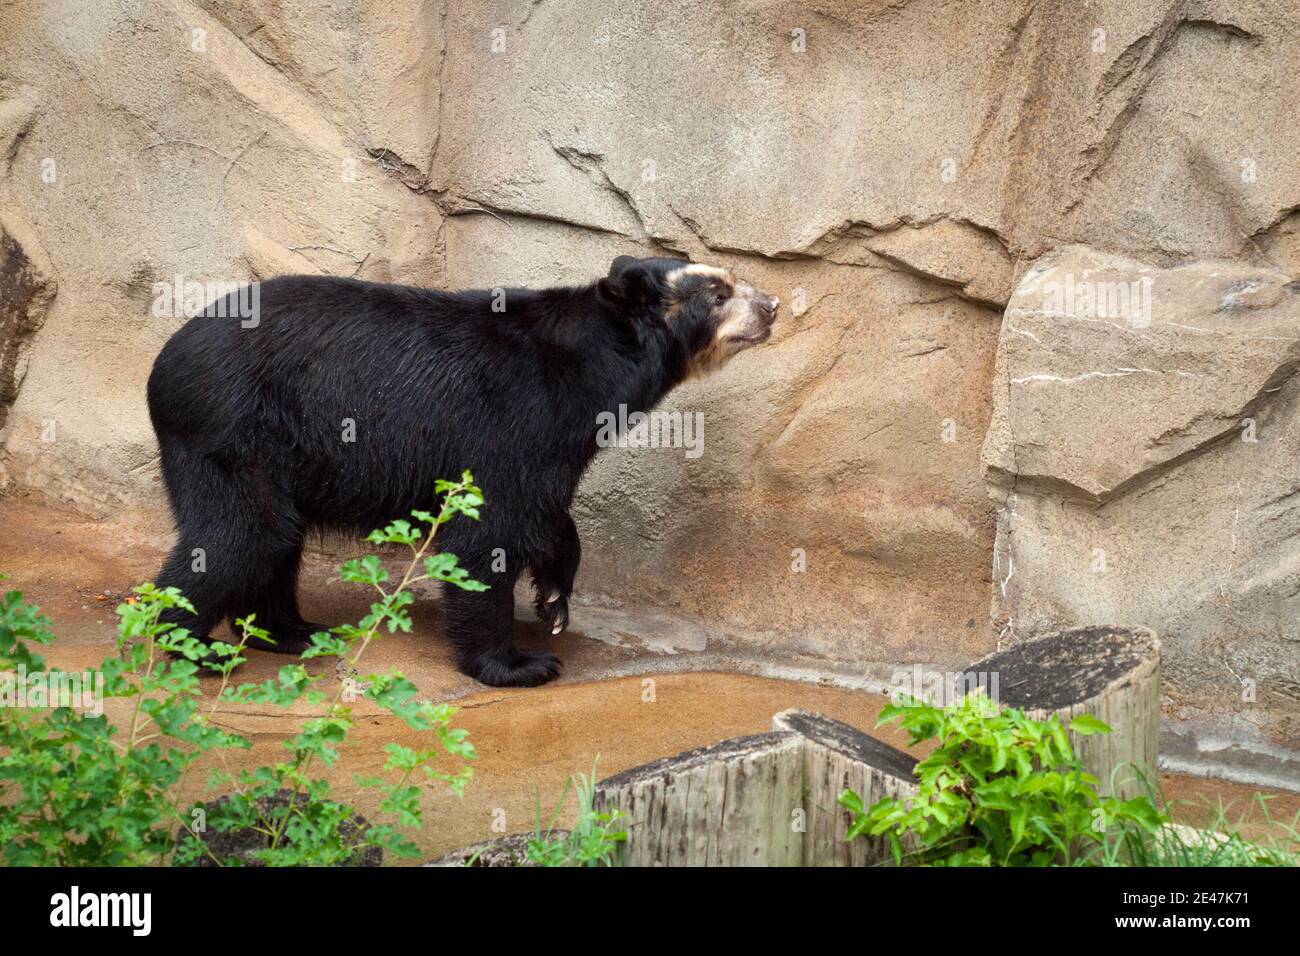 A spectacled bear (Tremarctos ornatus), also known as the Andean bear, or Andean short-faced bear, in captivity at the Lincoln Park Zoo in Chicago. Stock Photo